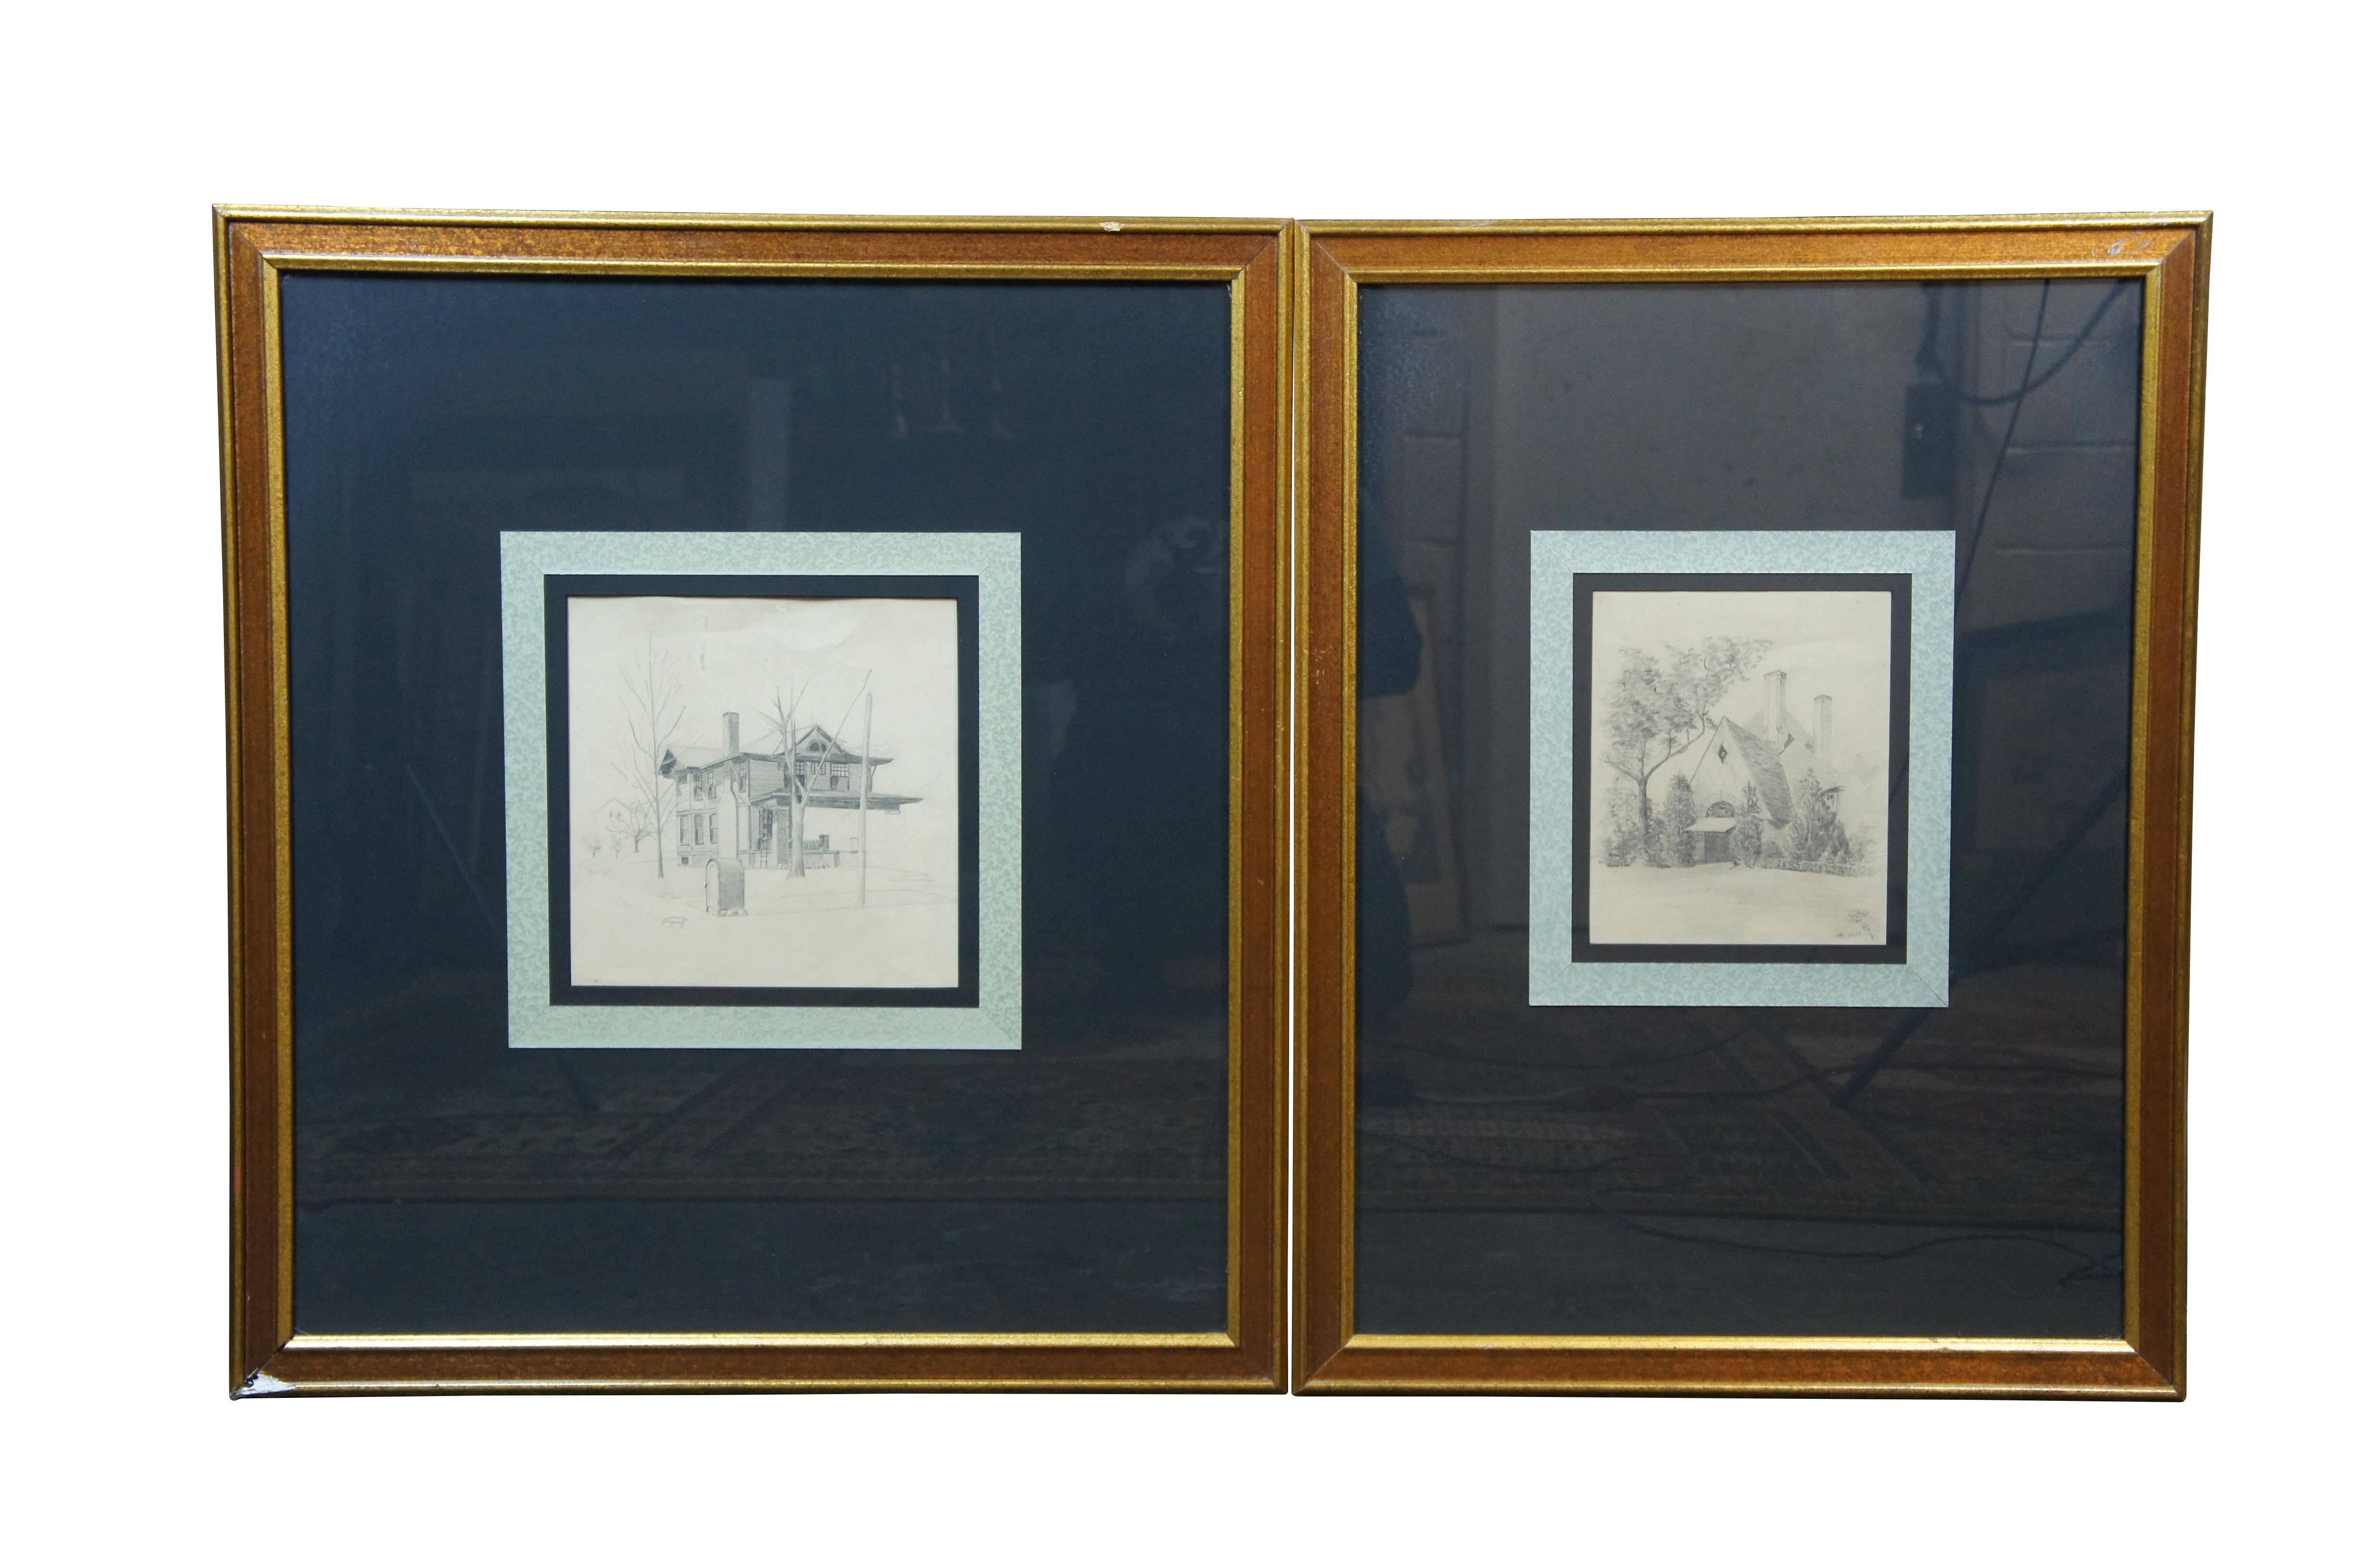 Set of three 20th century pencil sketches / architectural drawings of the fronts of houses. One signed by T. Voorhees and double dated April 25, '22 and '24. Beveled wood frame with gilded edges; black mat with blue marbled detail.

